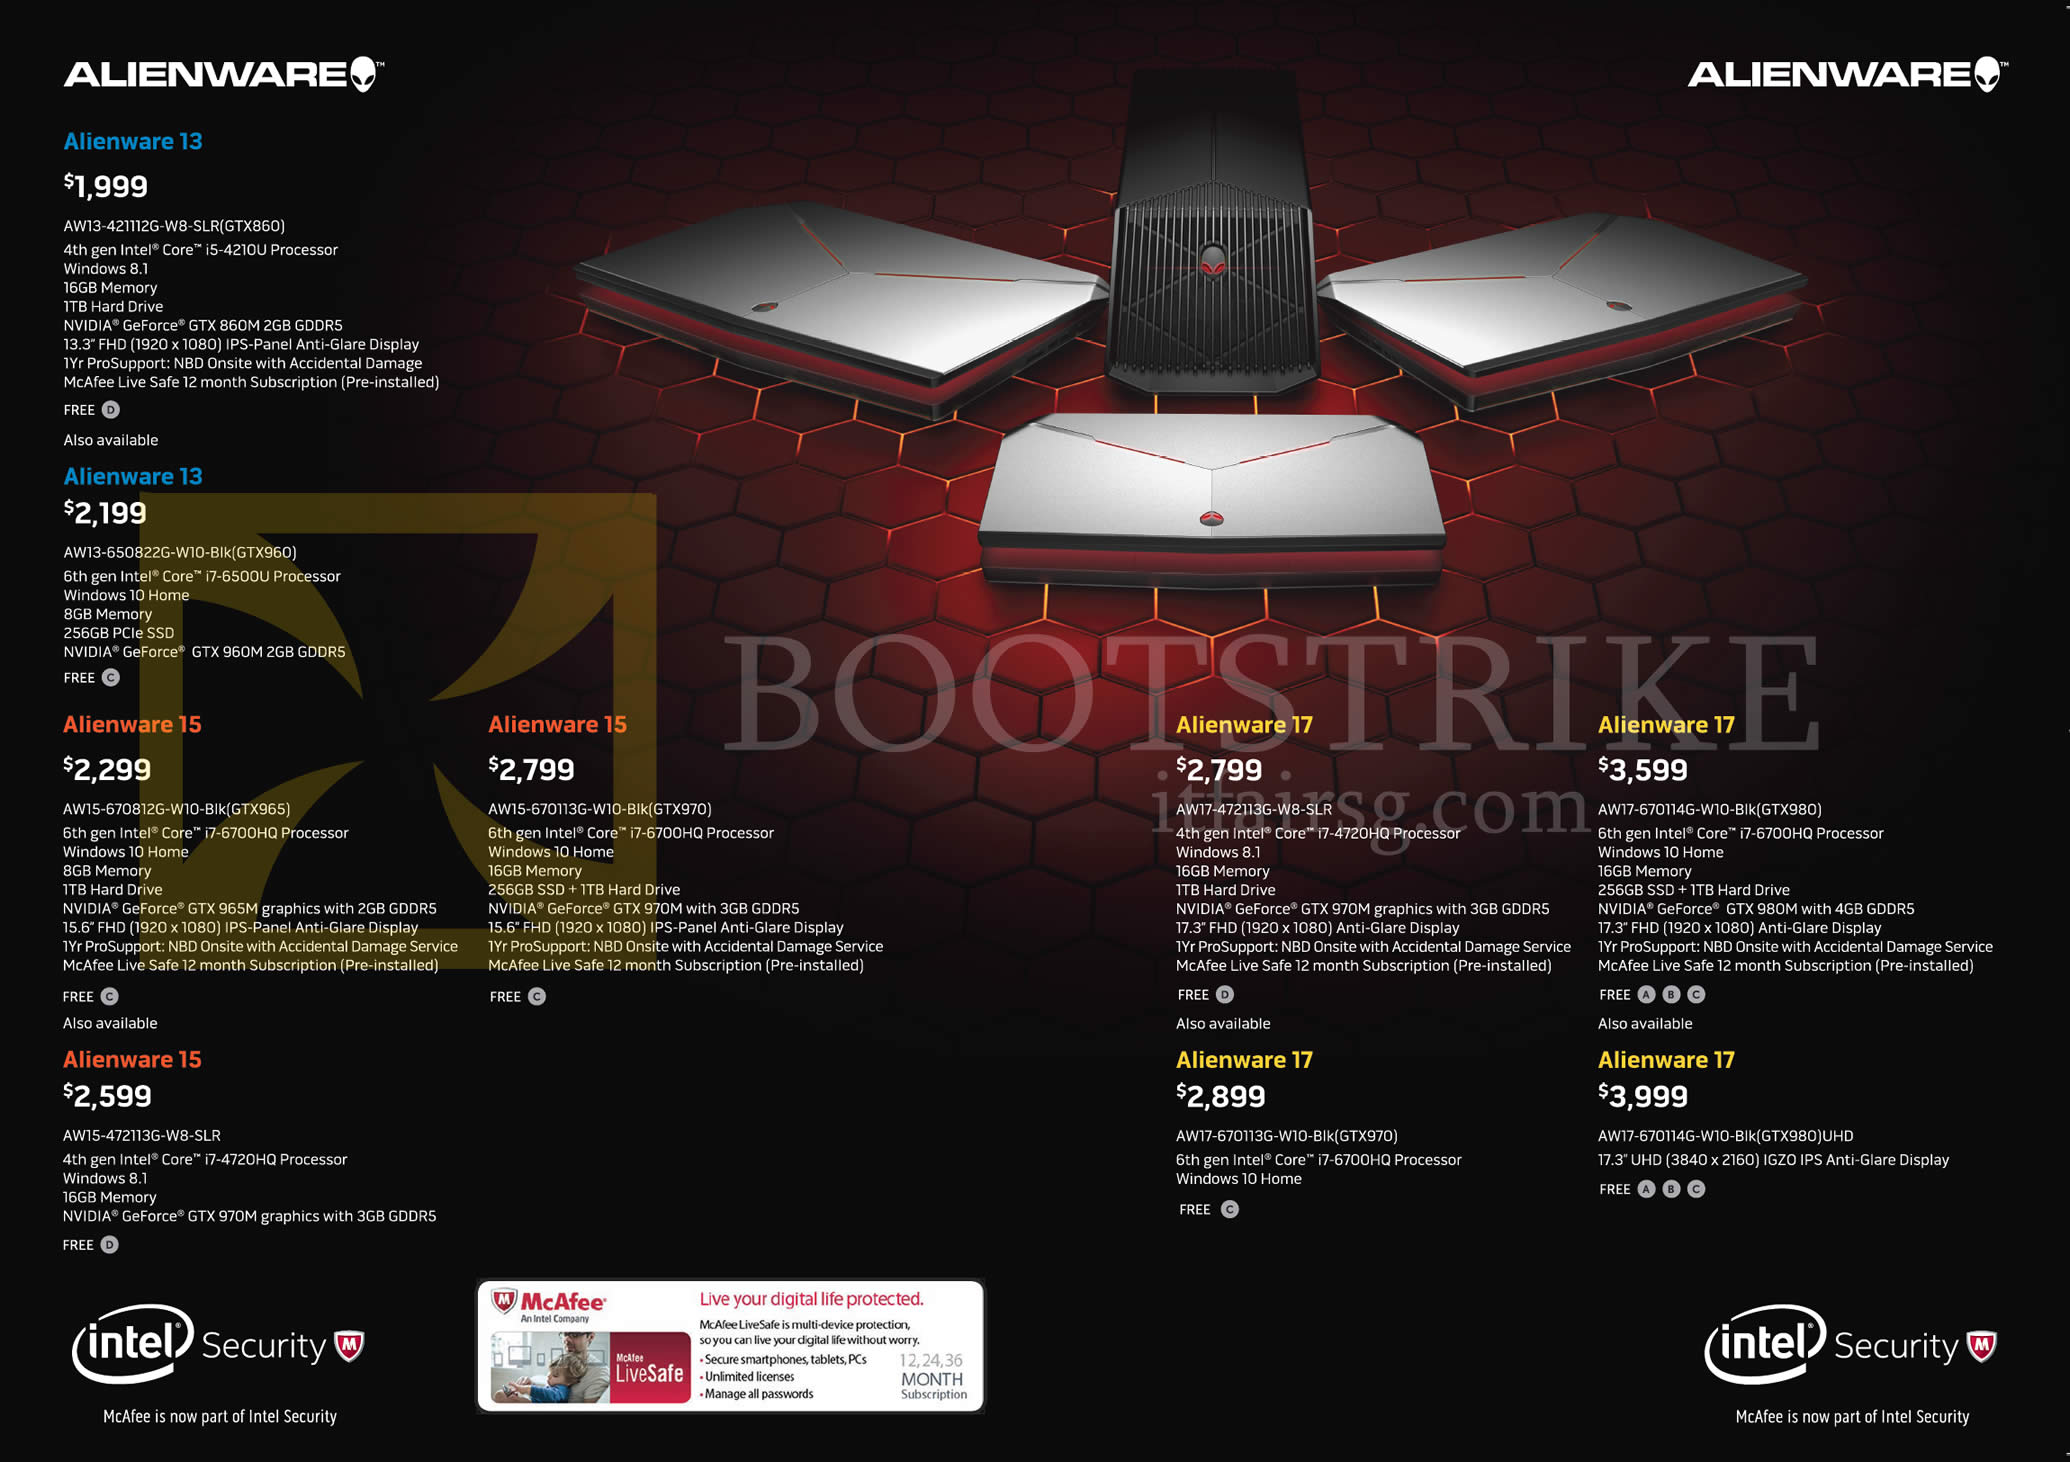 SITEX 2015 price list image brochure of Dell Notebooks Alienware AW13-421112G-W8-SLR GTX860, 650822G-W10-Blk GTX960, AW15-670812G-W10-Blk GTX965, 670n3G-W10-Blk GTX970, 472113G-W8-SLR, AW17-472113G-W8-SLR